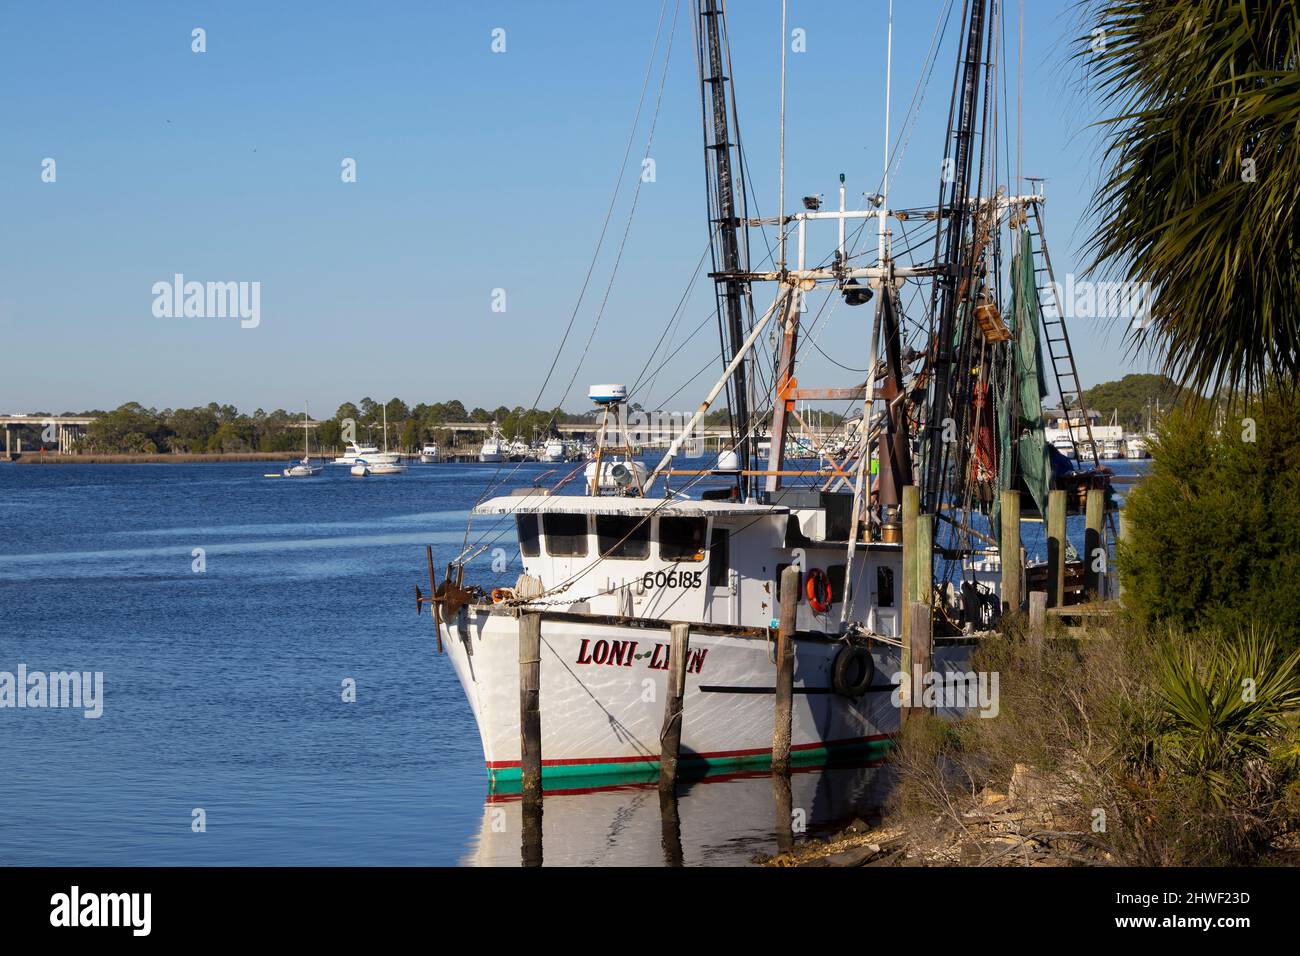 Shrimp boat in the harbor of Carrabelle, Florida Stock Photo